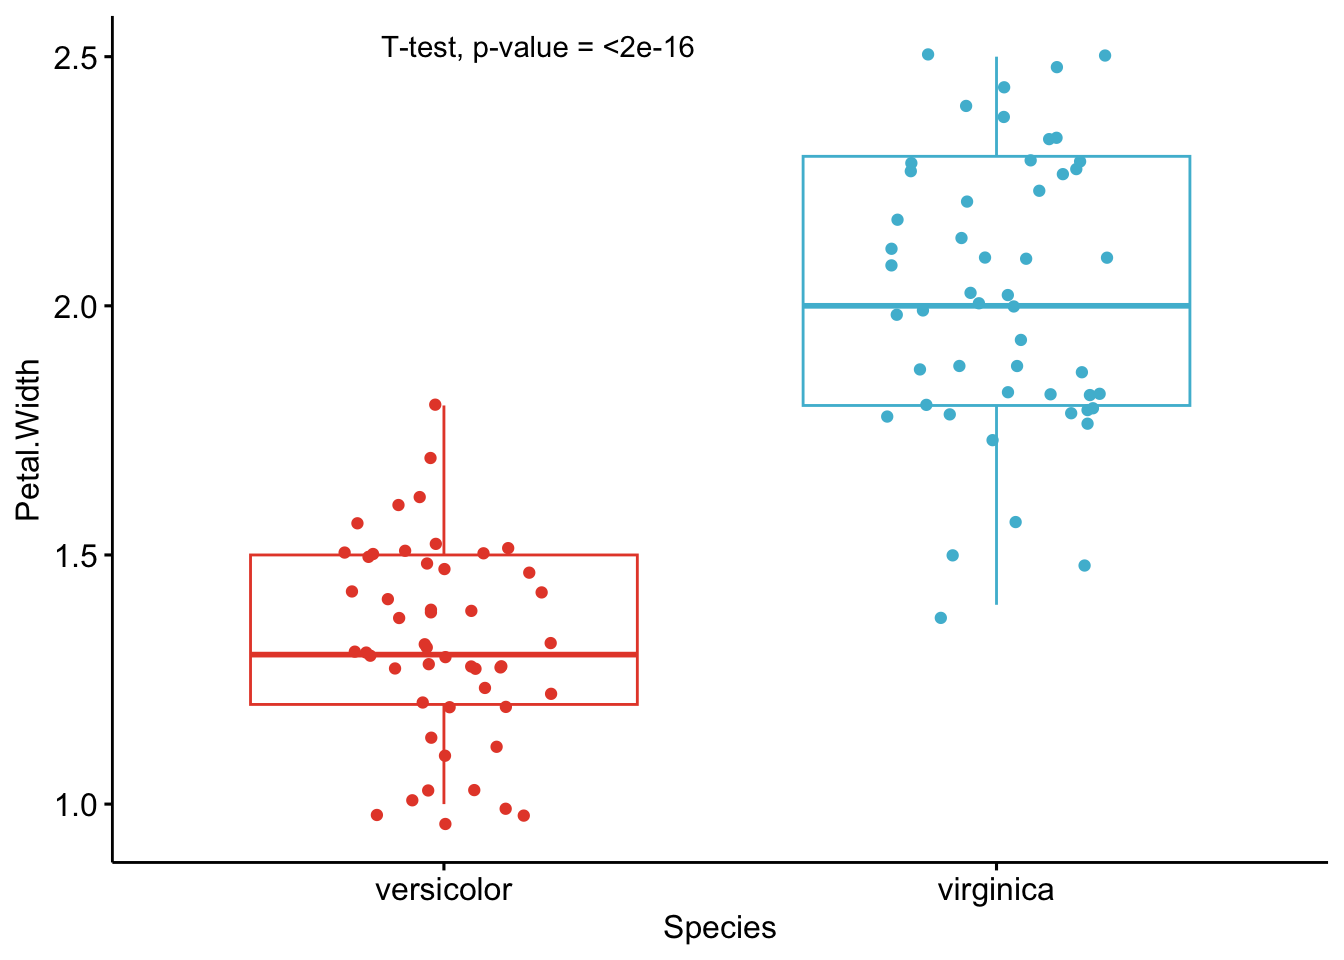 How To Do A T-Test Or Anova For More Than One Variable At Once In R? -  Stats And R